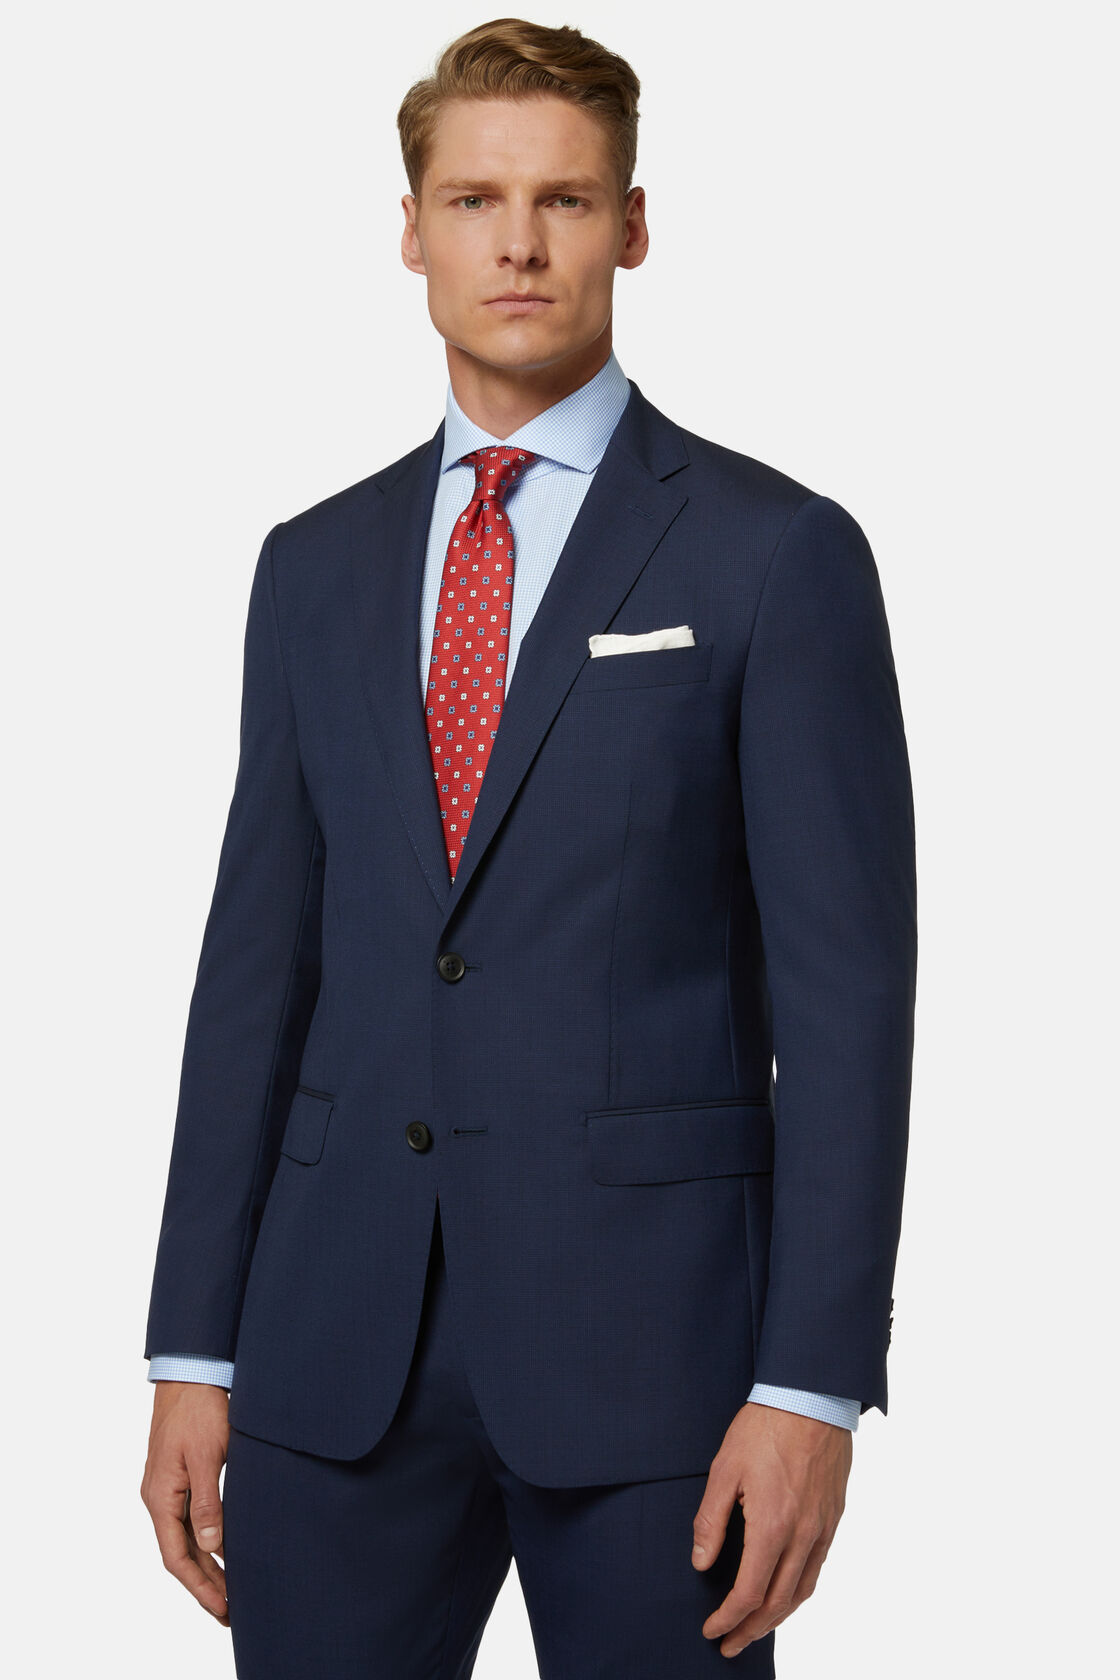 Blue Checked Pure Wool Suit, Navy blue, hi-res